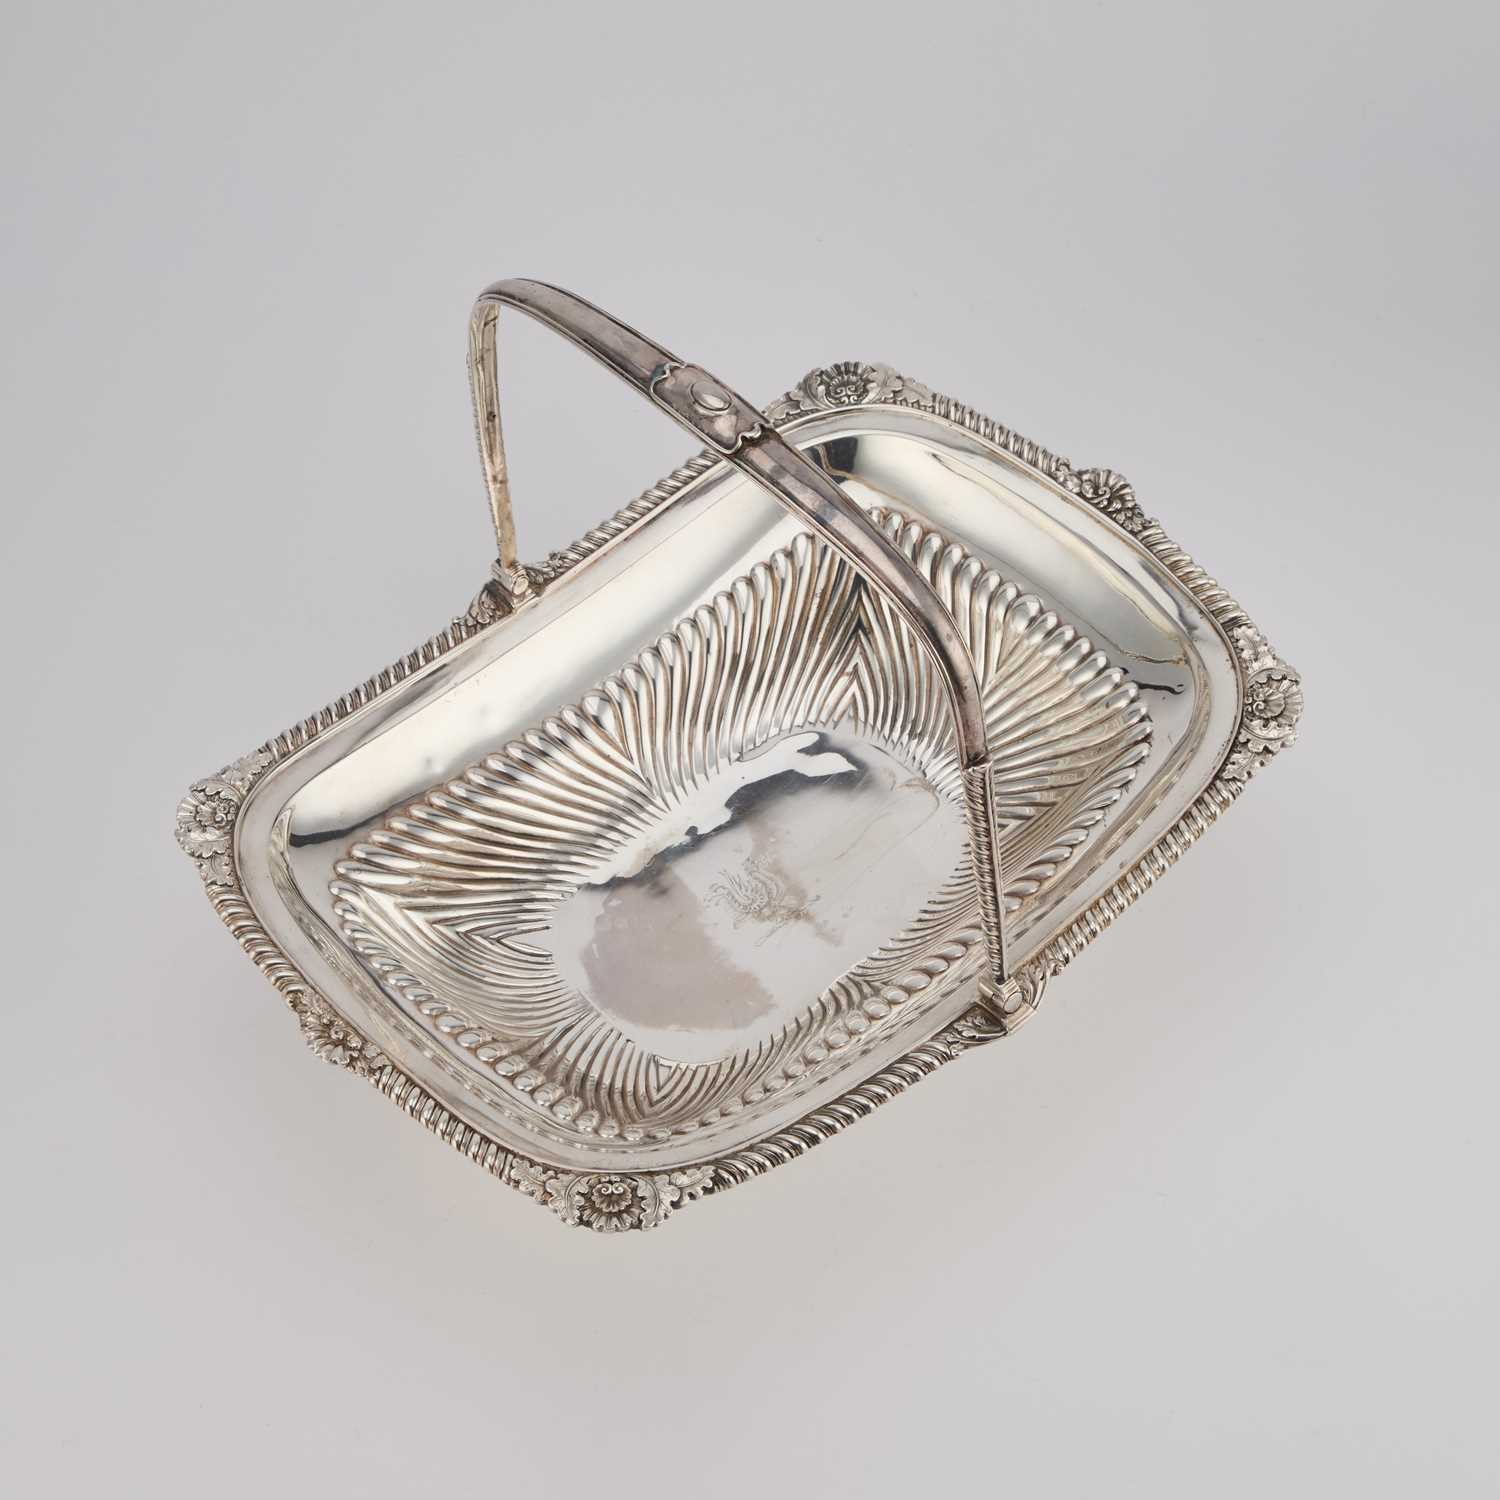 A GEORGE III SILVER CAKE BASKET - Image 2 of 4